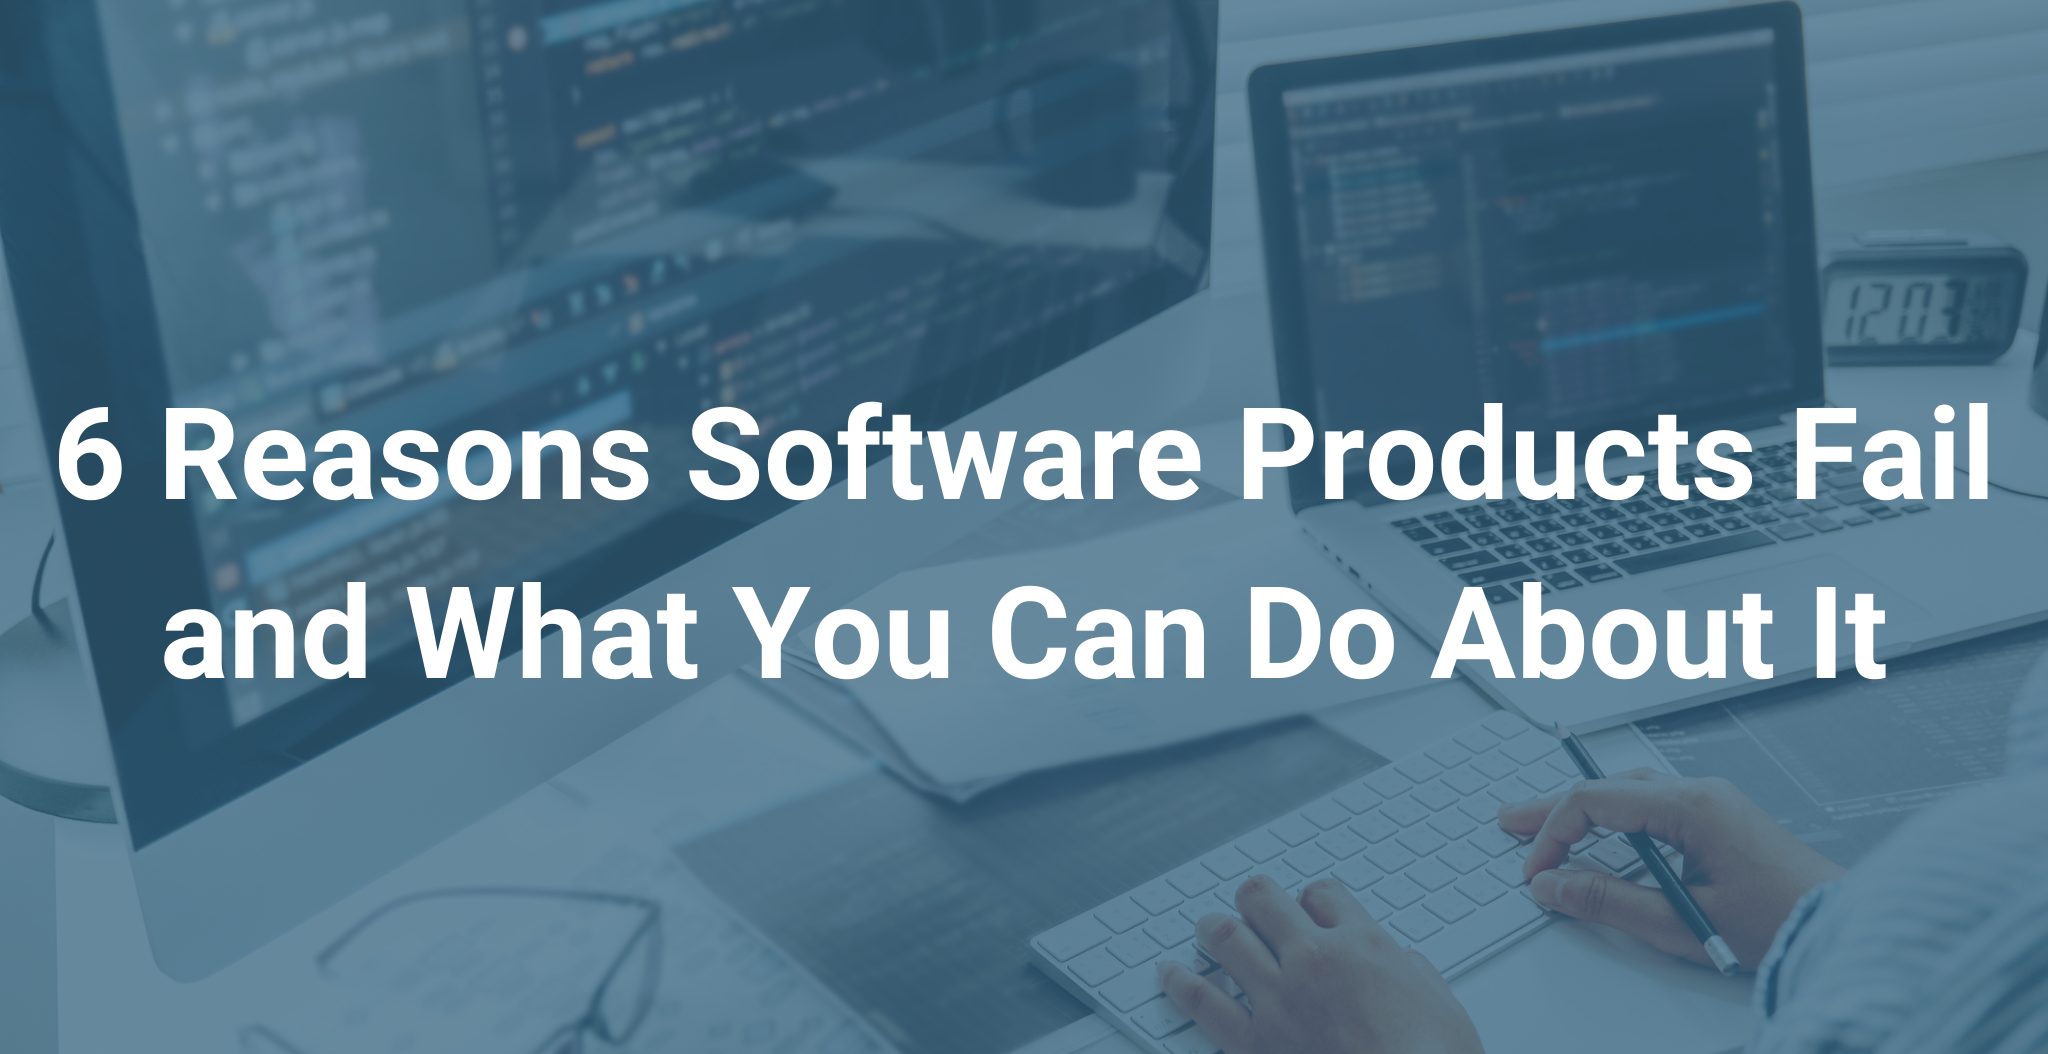 6 Reasons Software Products Fail and What You Can Do About It (1)